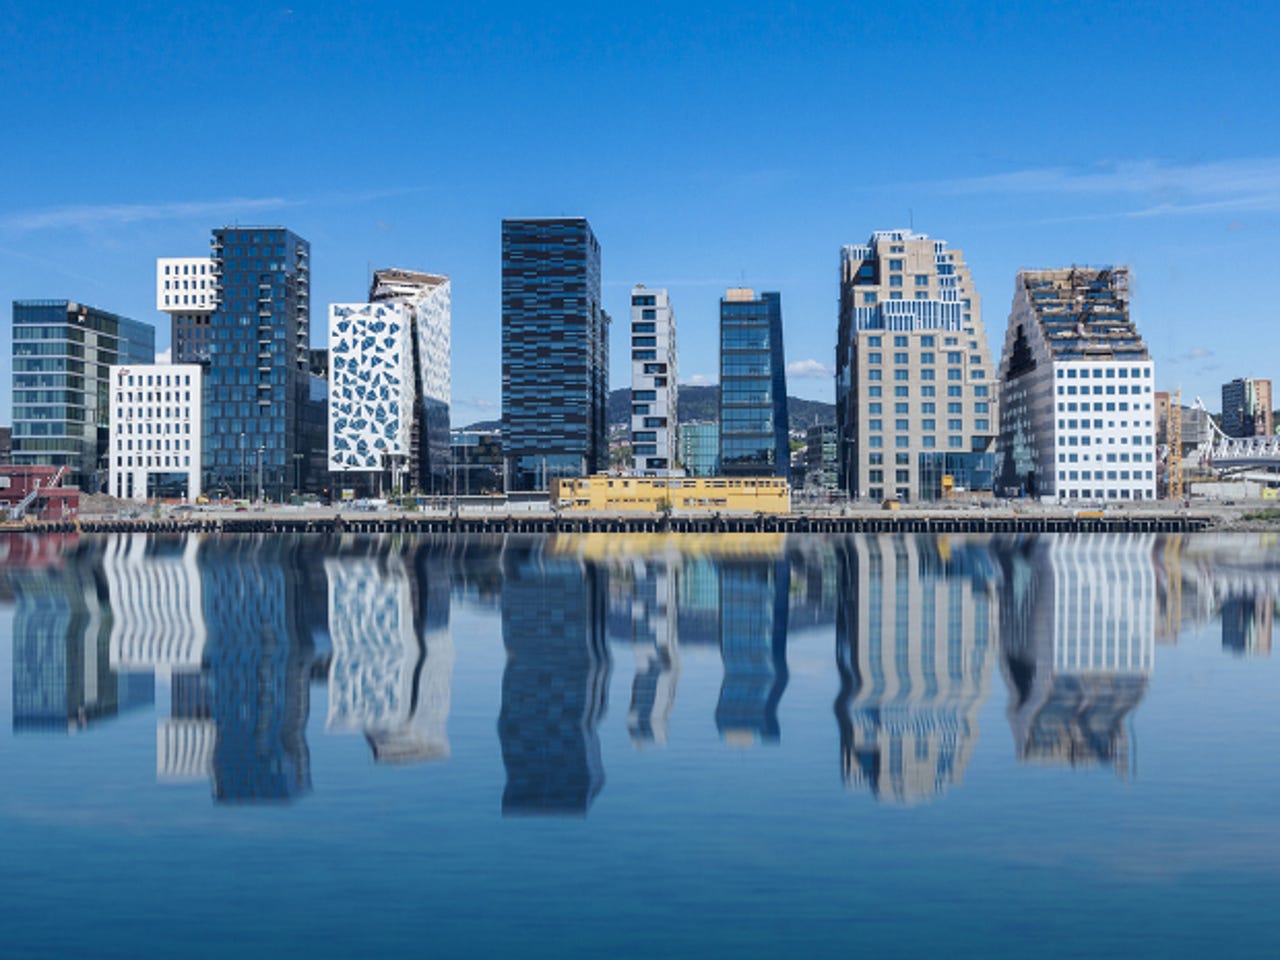 Oslo became the world's first LTE city in 2009